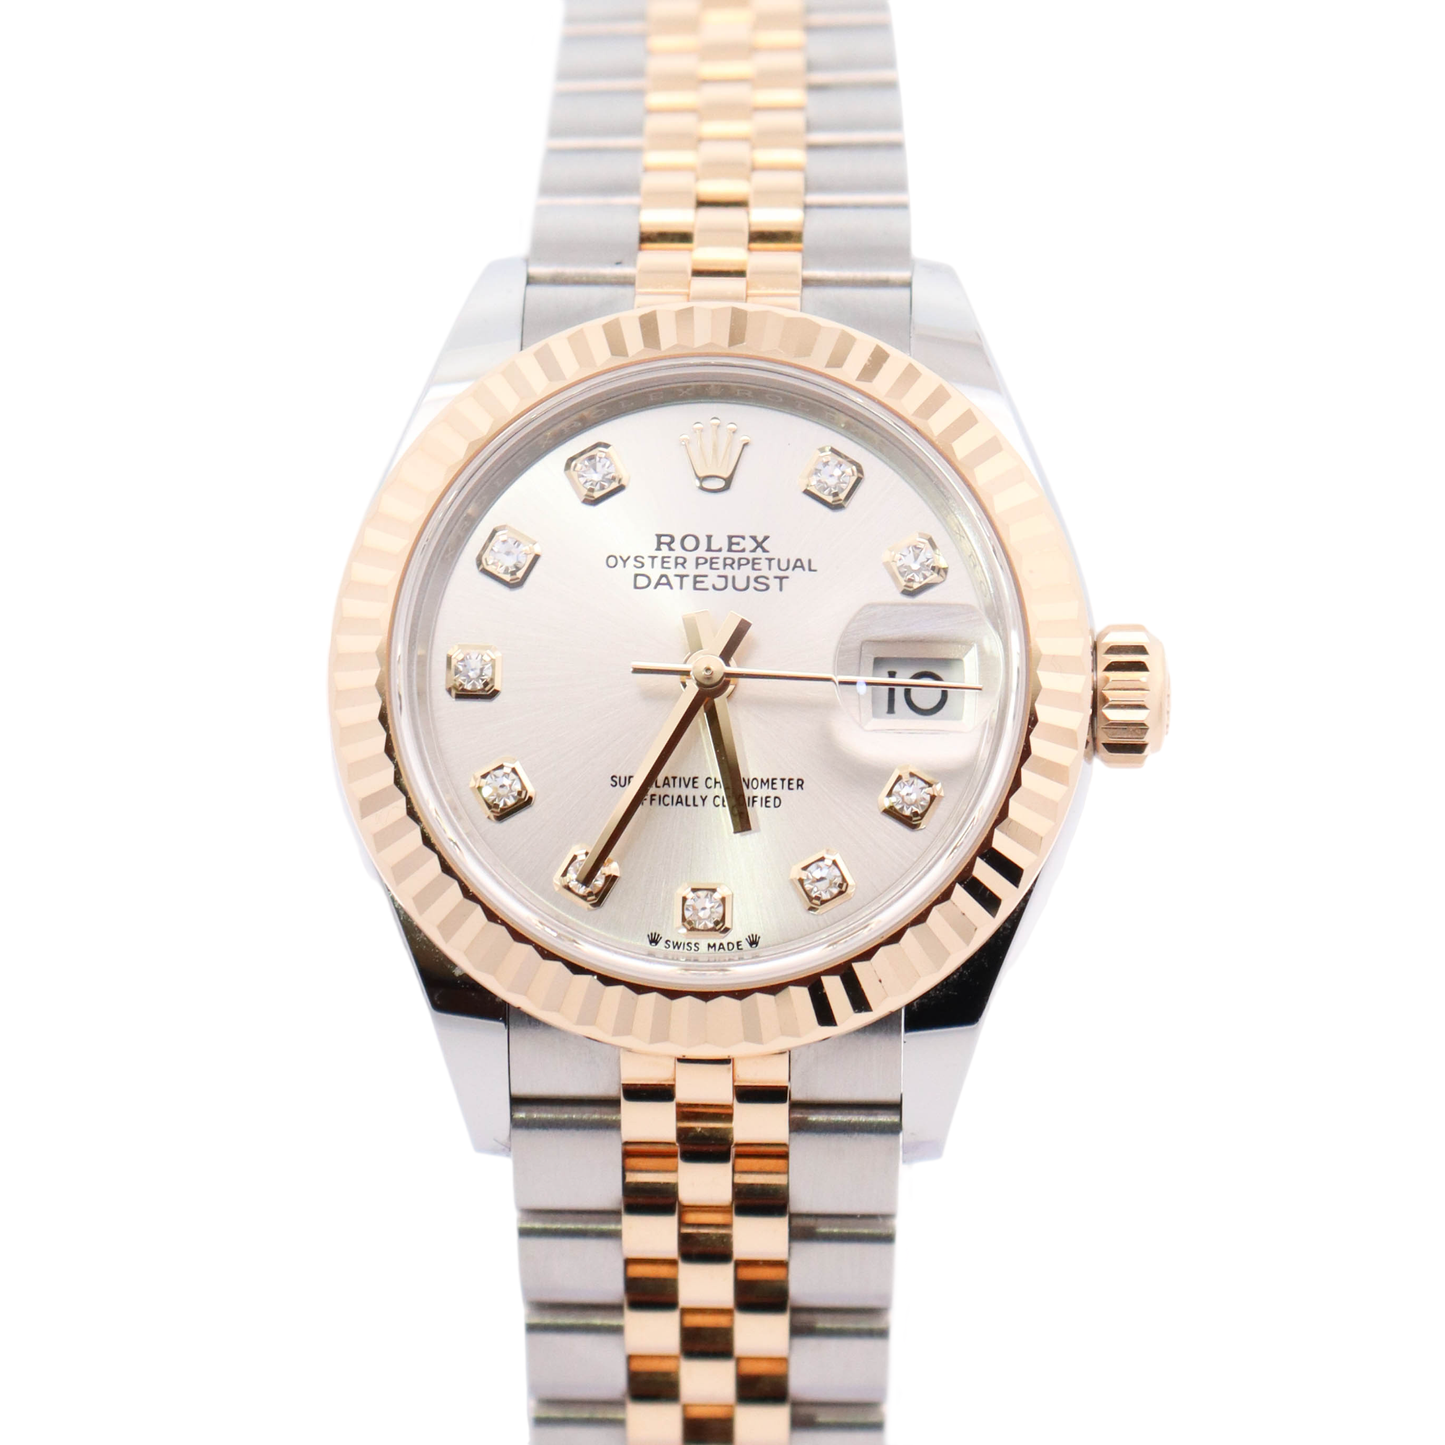 Rolex Datejust Yellow Gold & Stainless Steel 28mm Silver Diamond Dial Watch Reference# 279173 - Happy Jewelers Fine Jewelry Lifetime Warranty